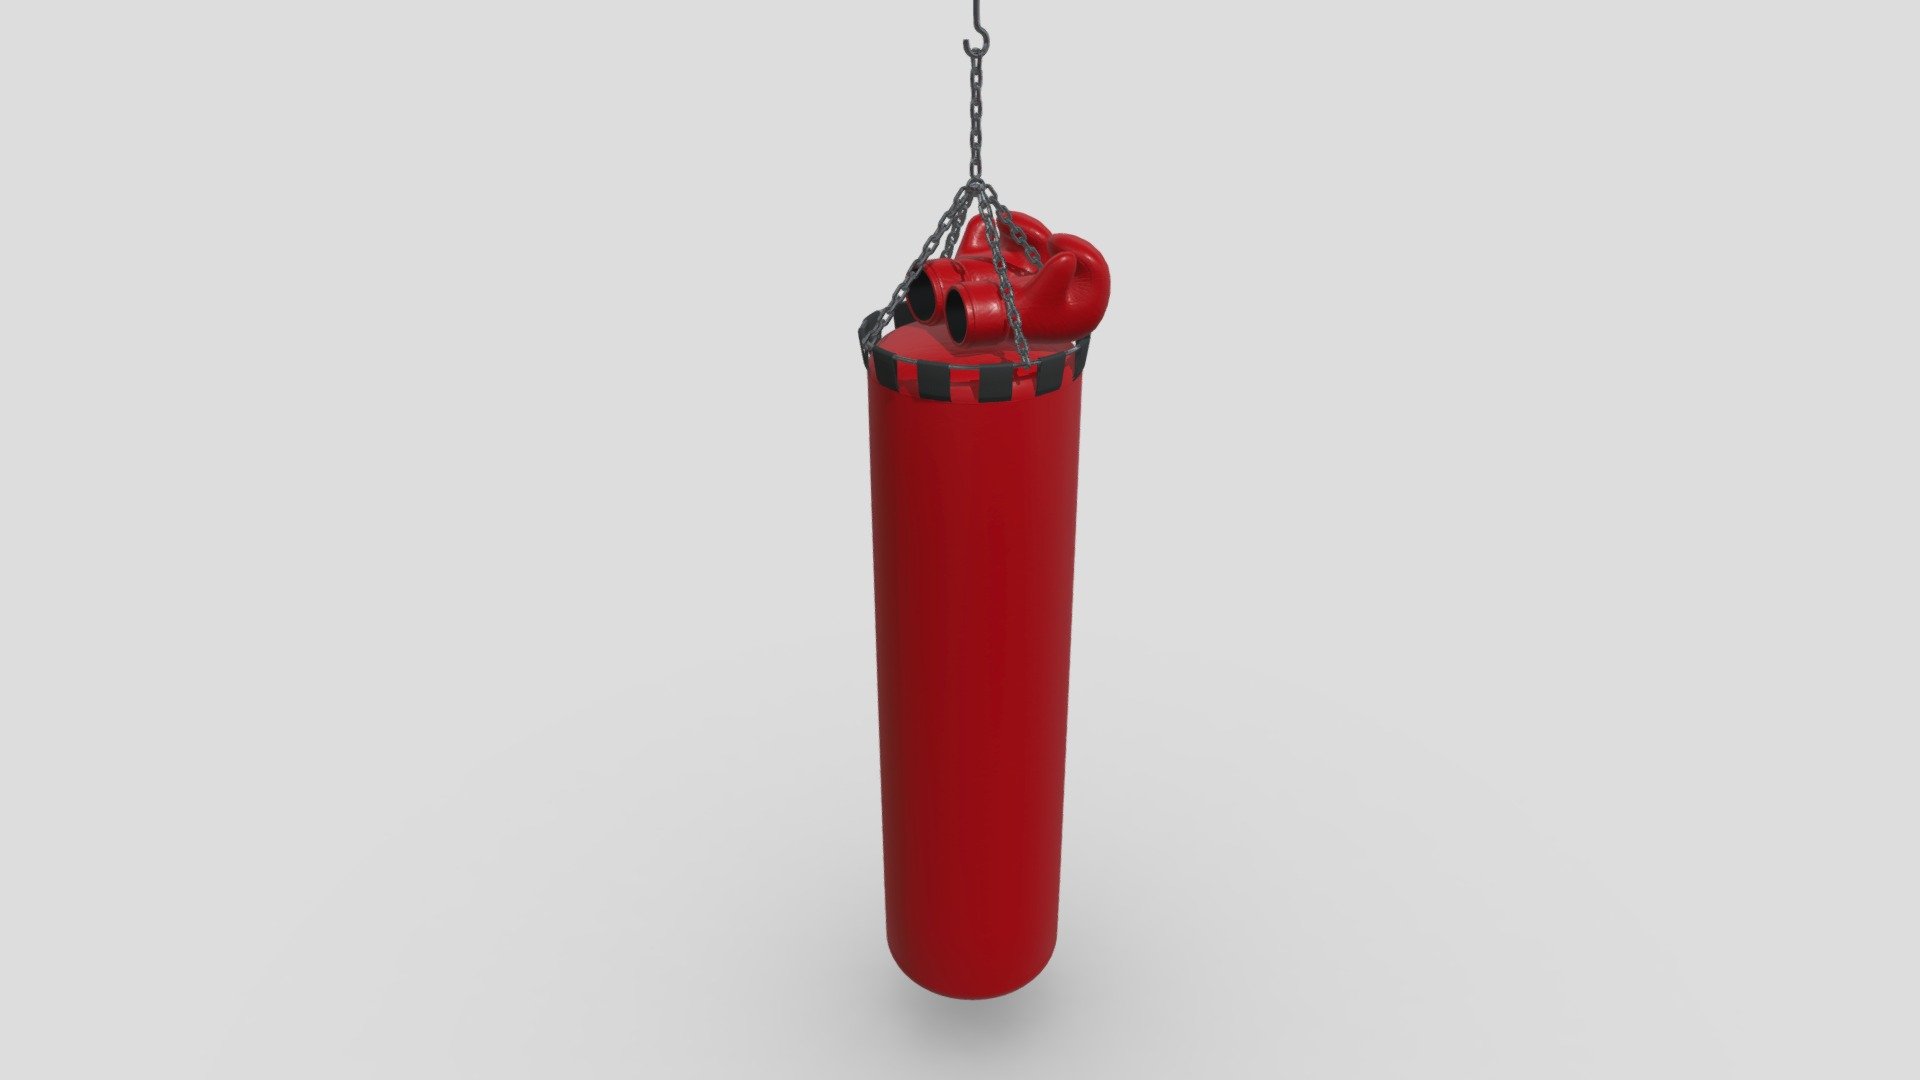 3d model-Boxing Pear + Gloves.
New, no scratches. But if you need the Same punching bag beaten in hard training, you will find it on my page). If you need A punching bag Yellow, Purple or other color, with an inscription or logo, write to me, I have one) 3d model